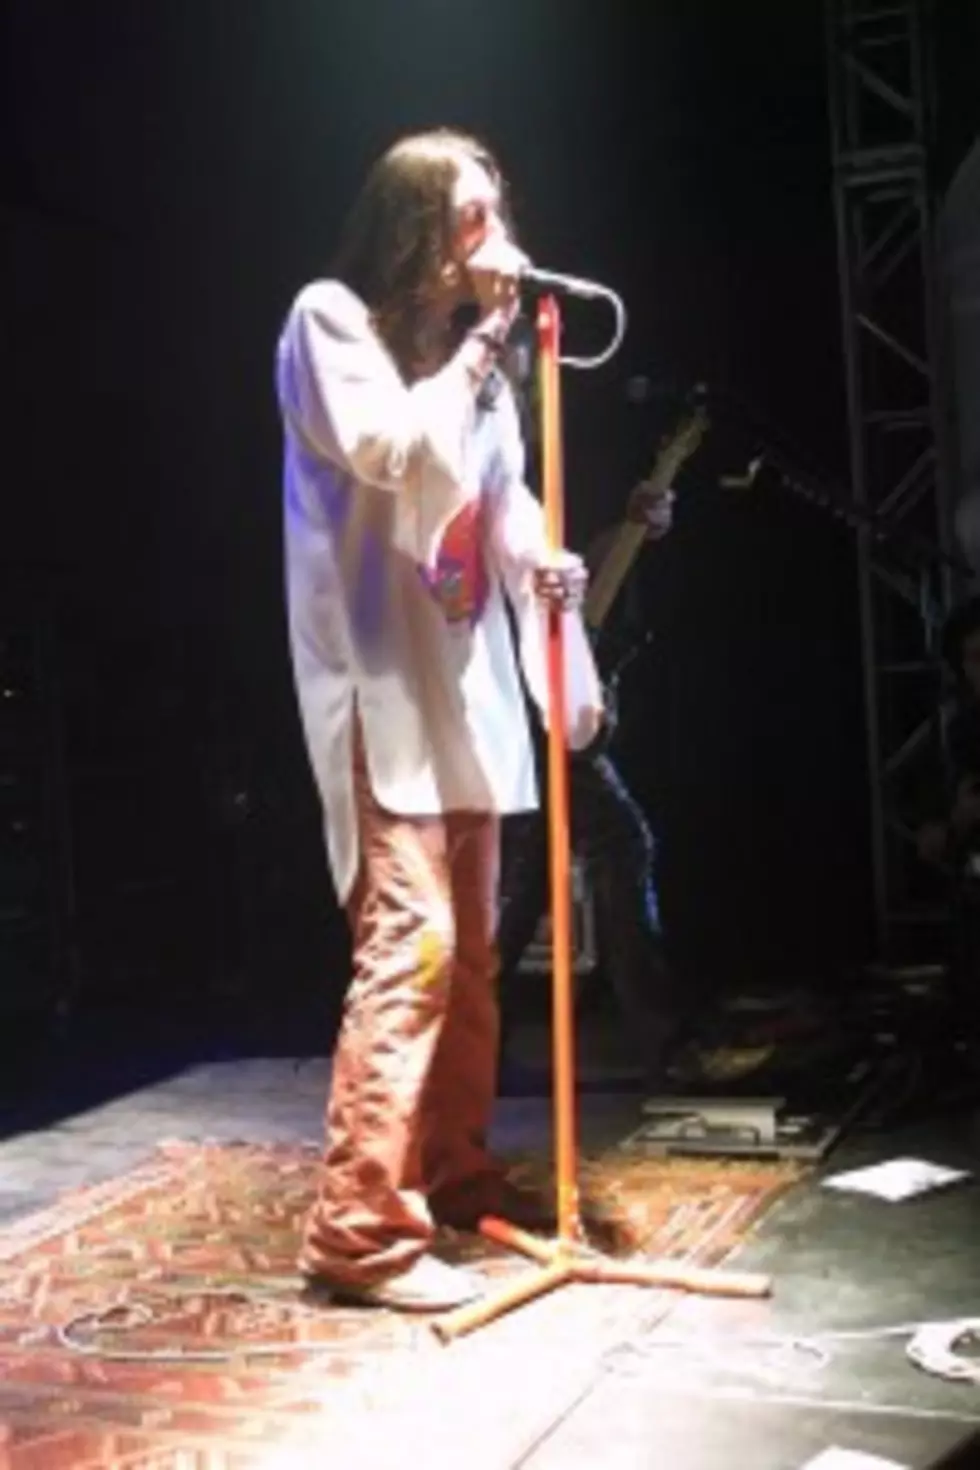 Black Crowes Call It Quits